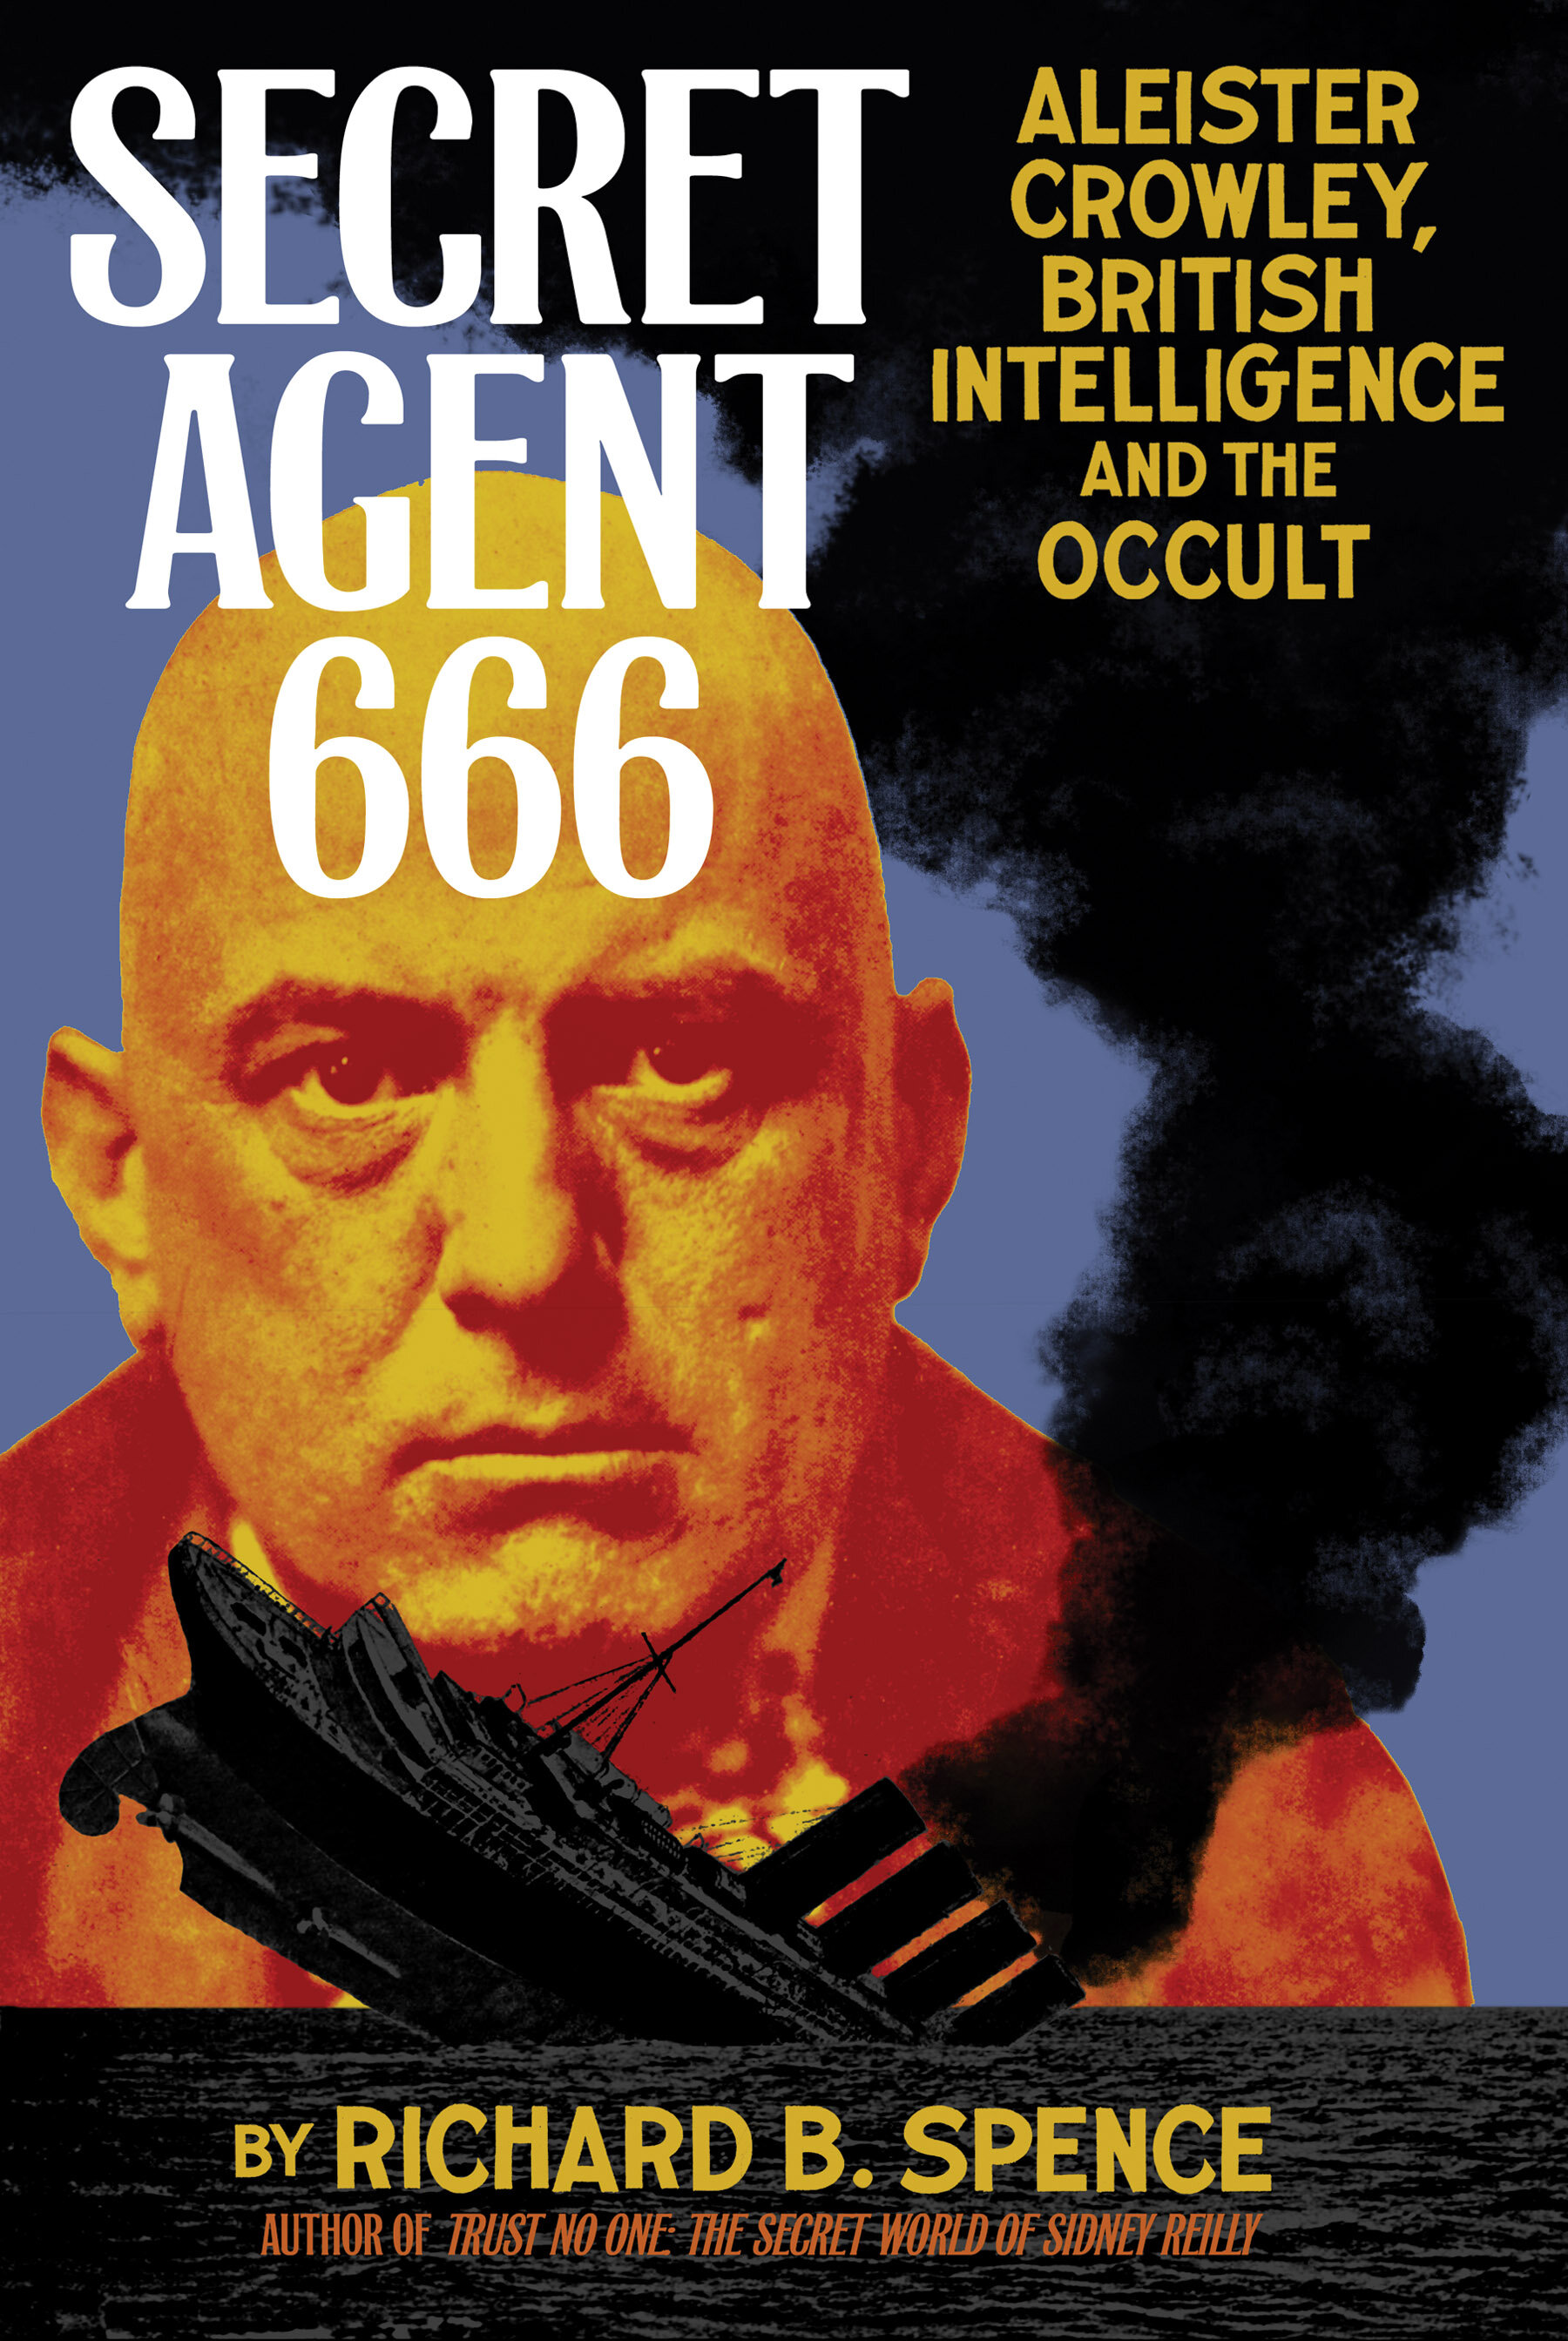 Secret Agent 666 Aleister Crowley, British Intelligence and the Occult by image